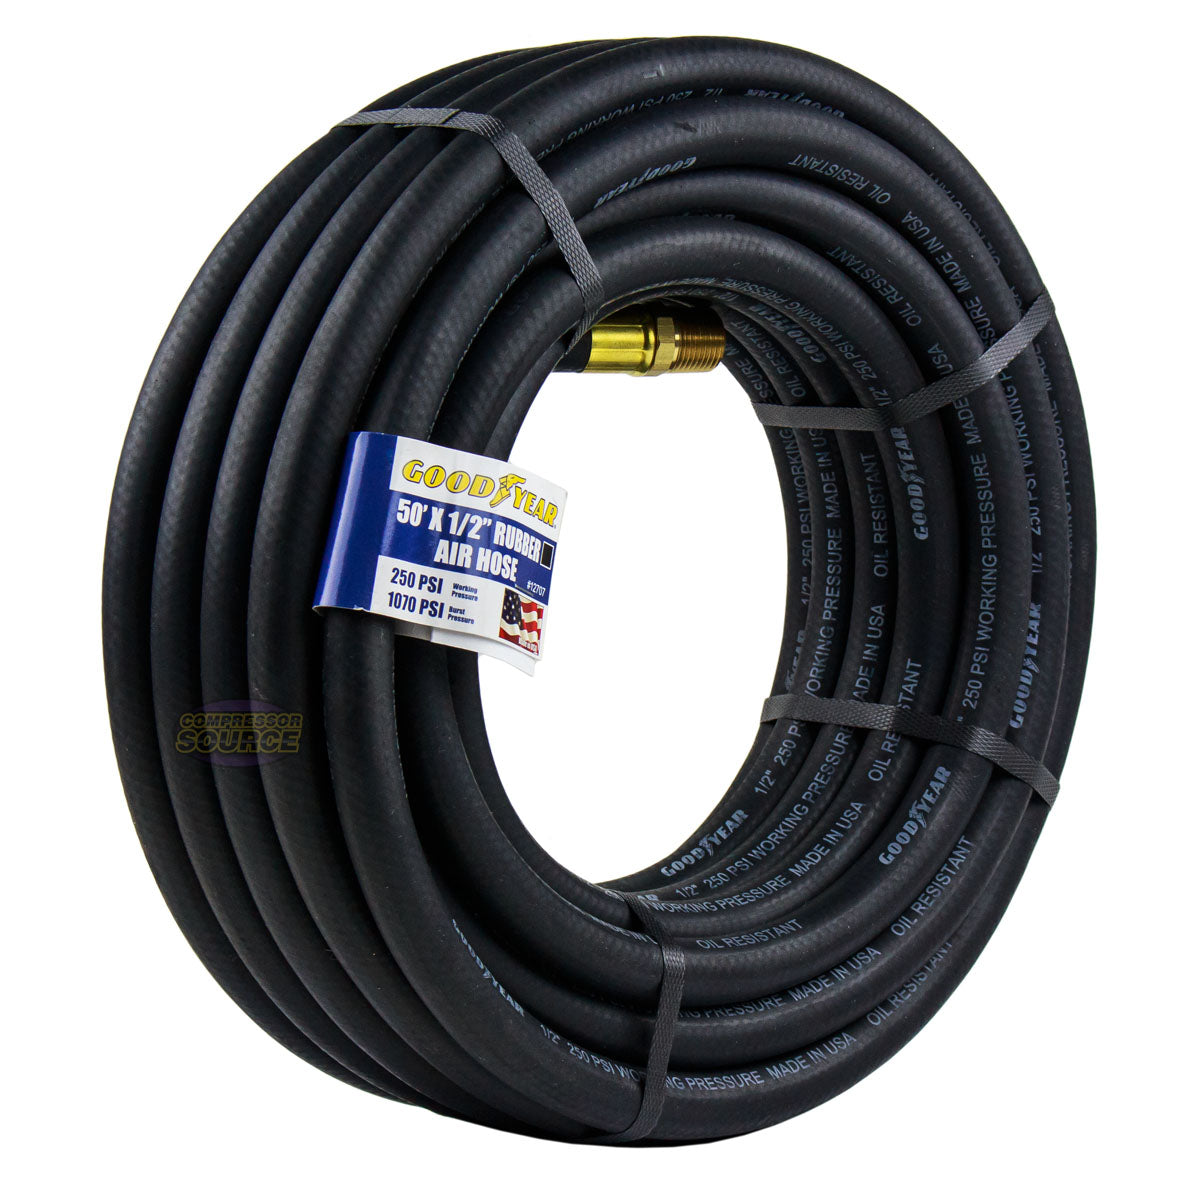 Goodyear 50' ft. x 1/2 in. Rubber Air Hose 250 PSI Air Compressor